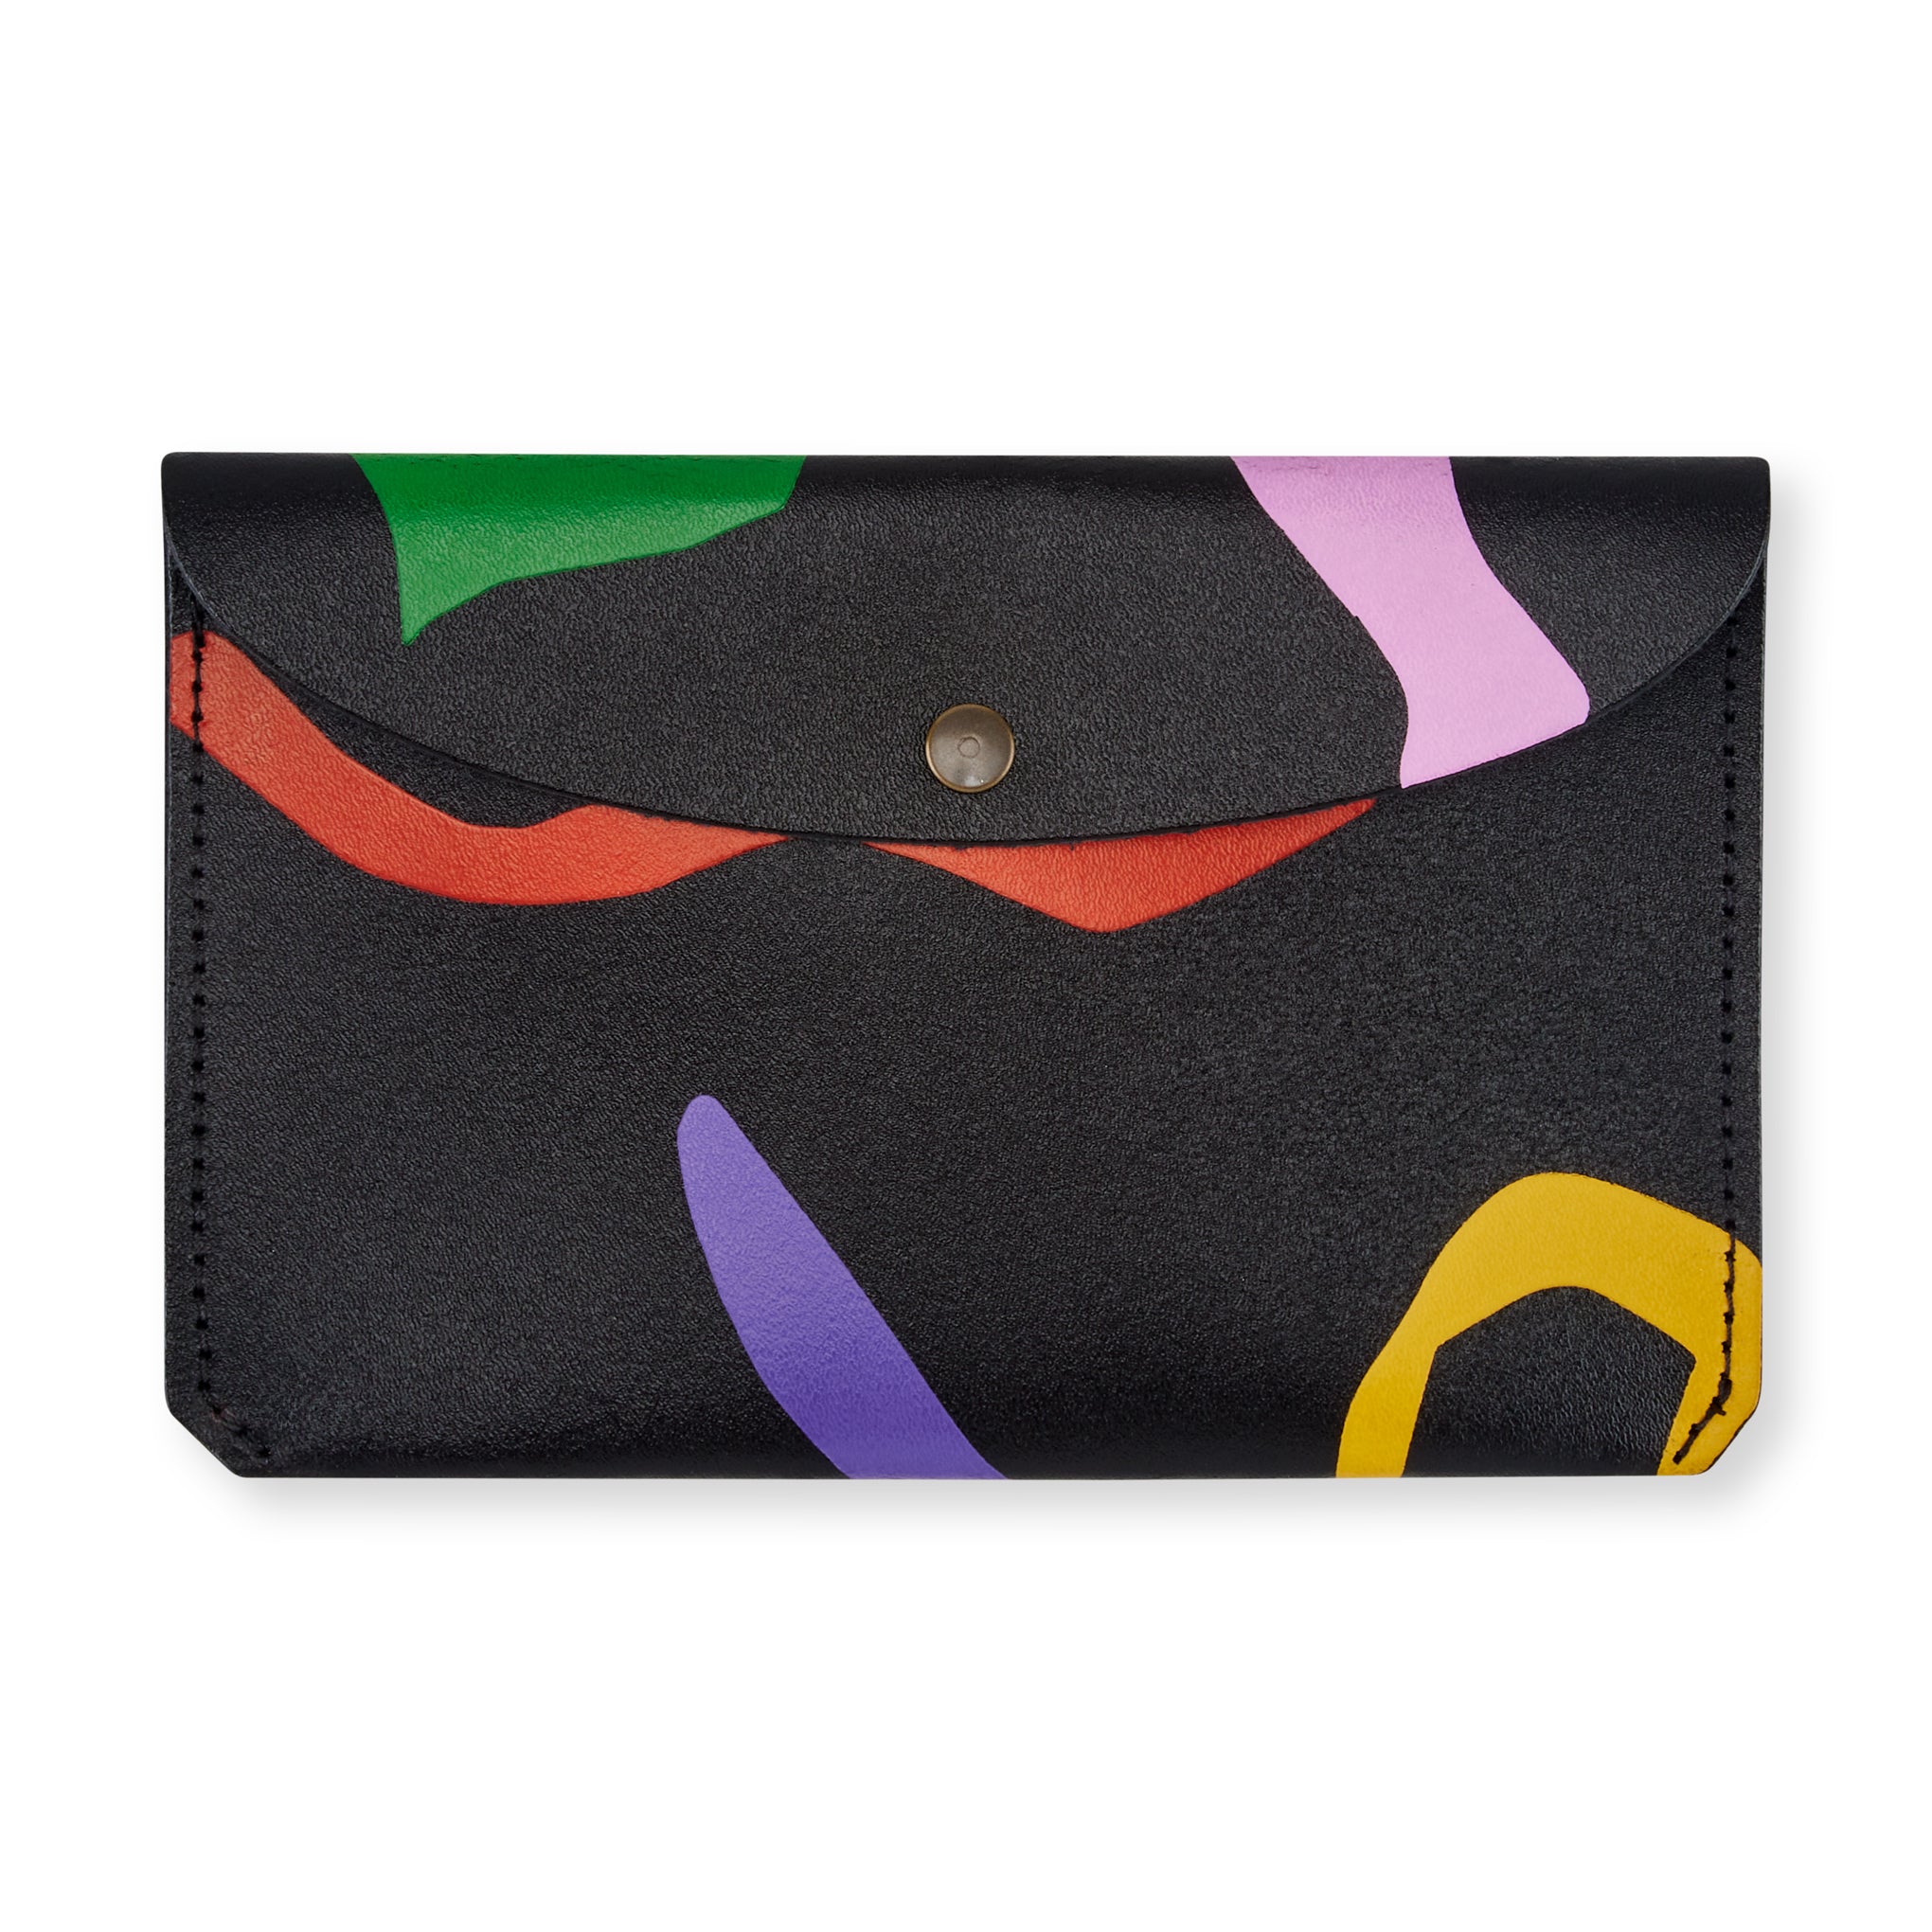 Black Leather Pouch - Lost Generation Goods